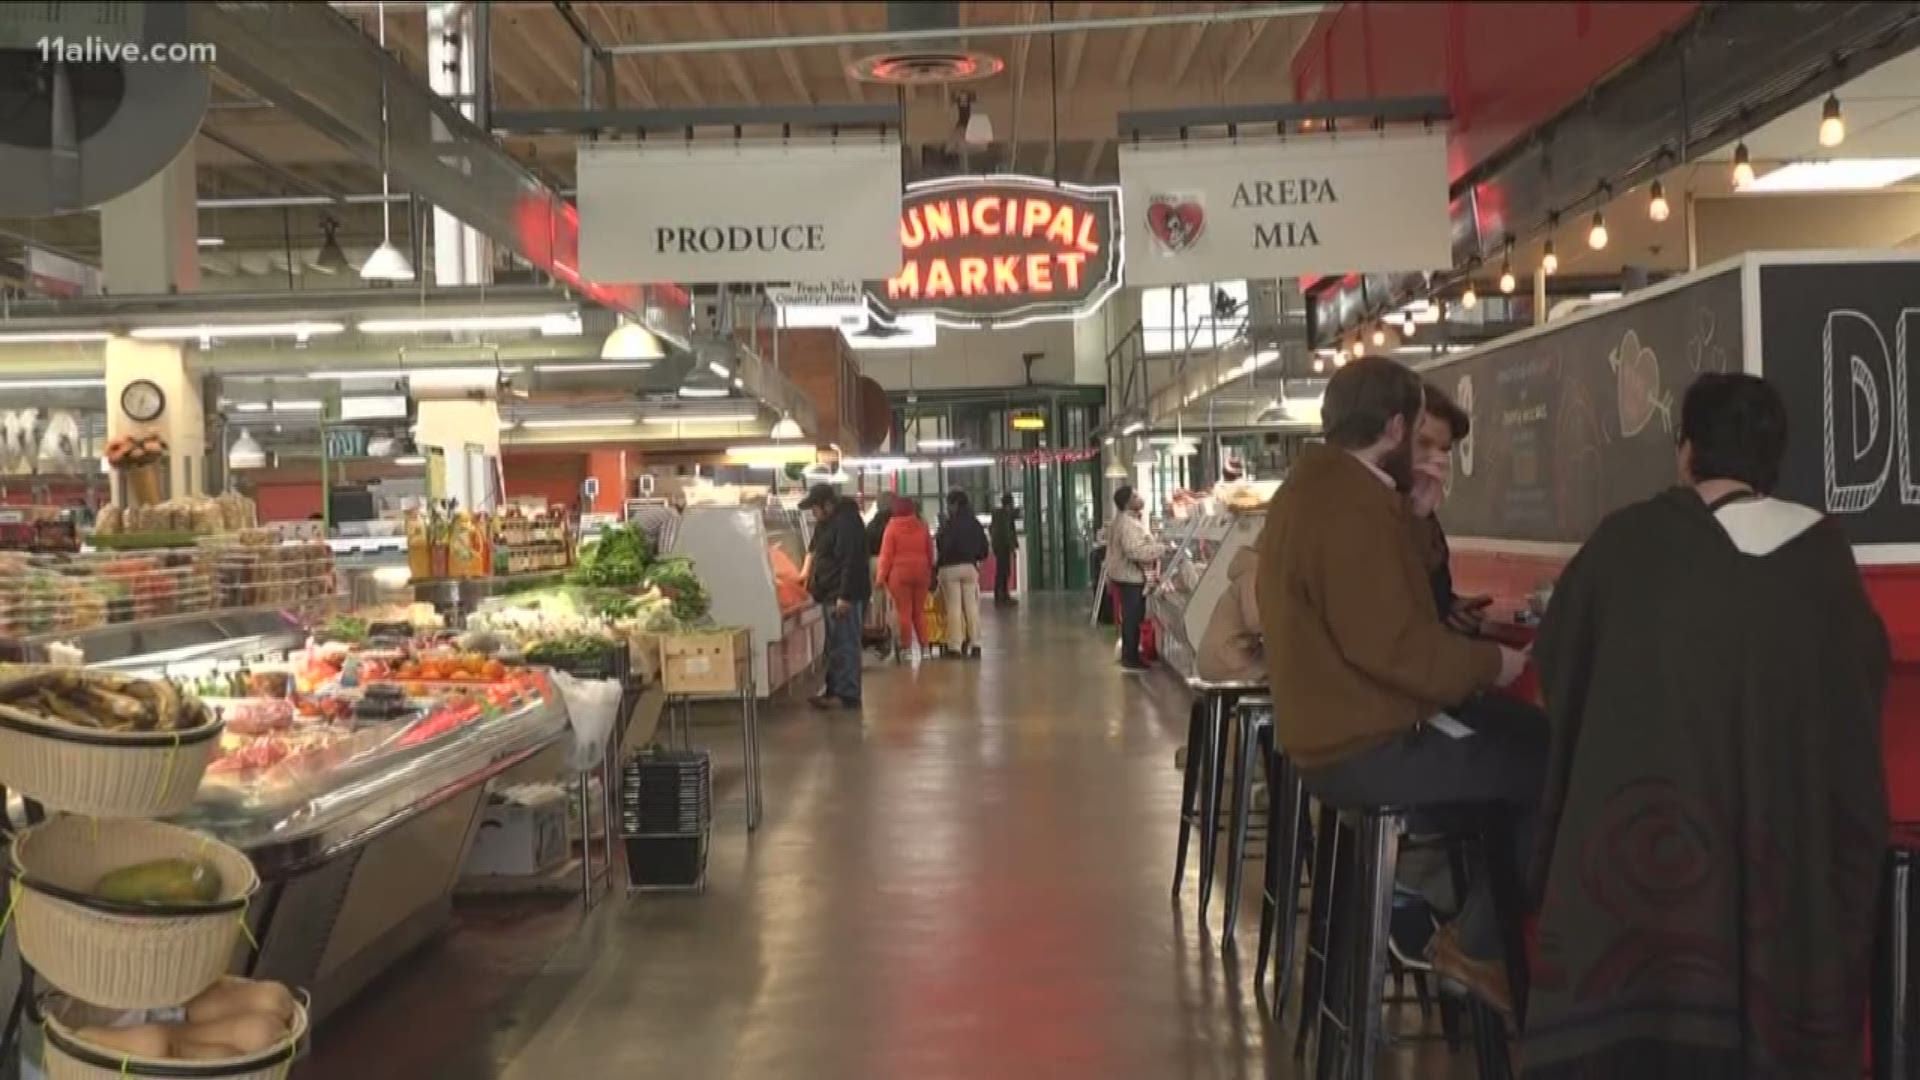 Here is a look at the Municipal Market.